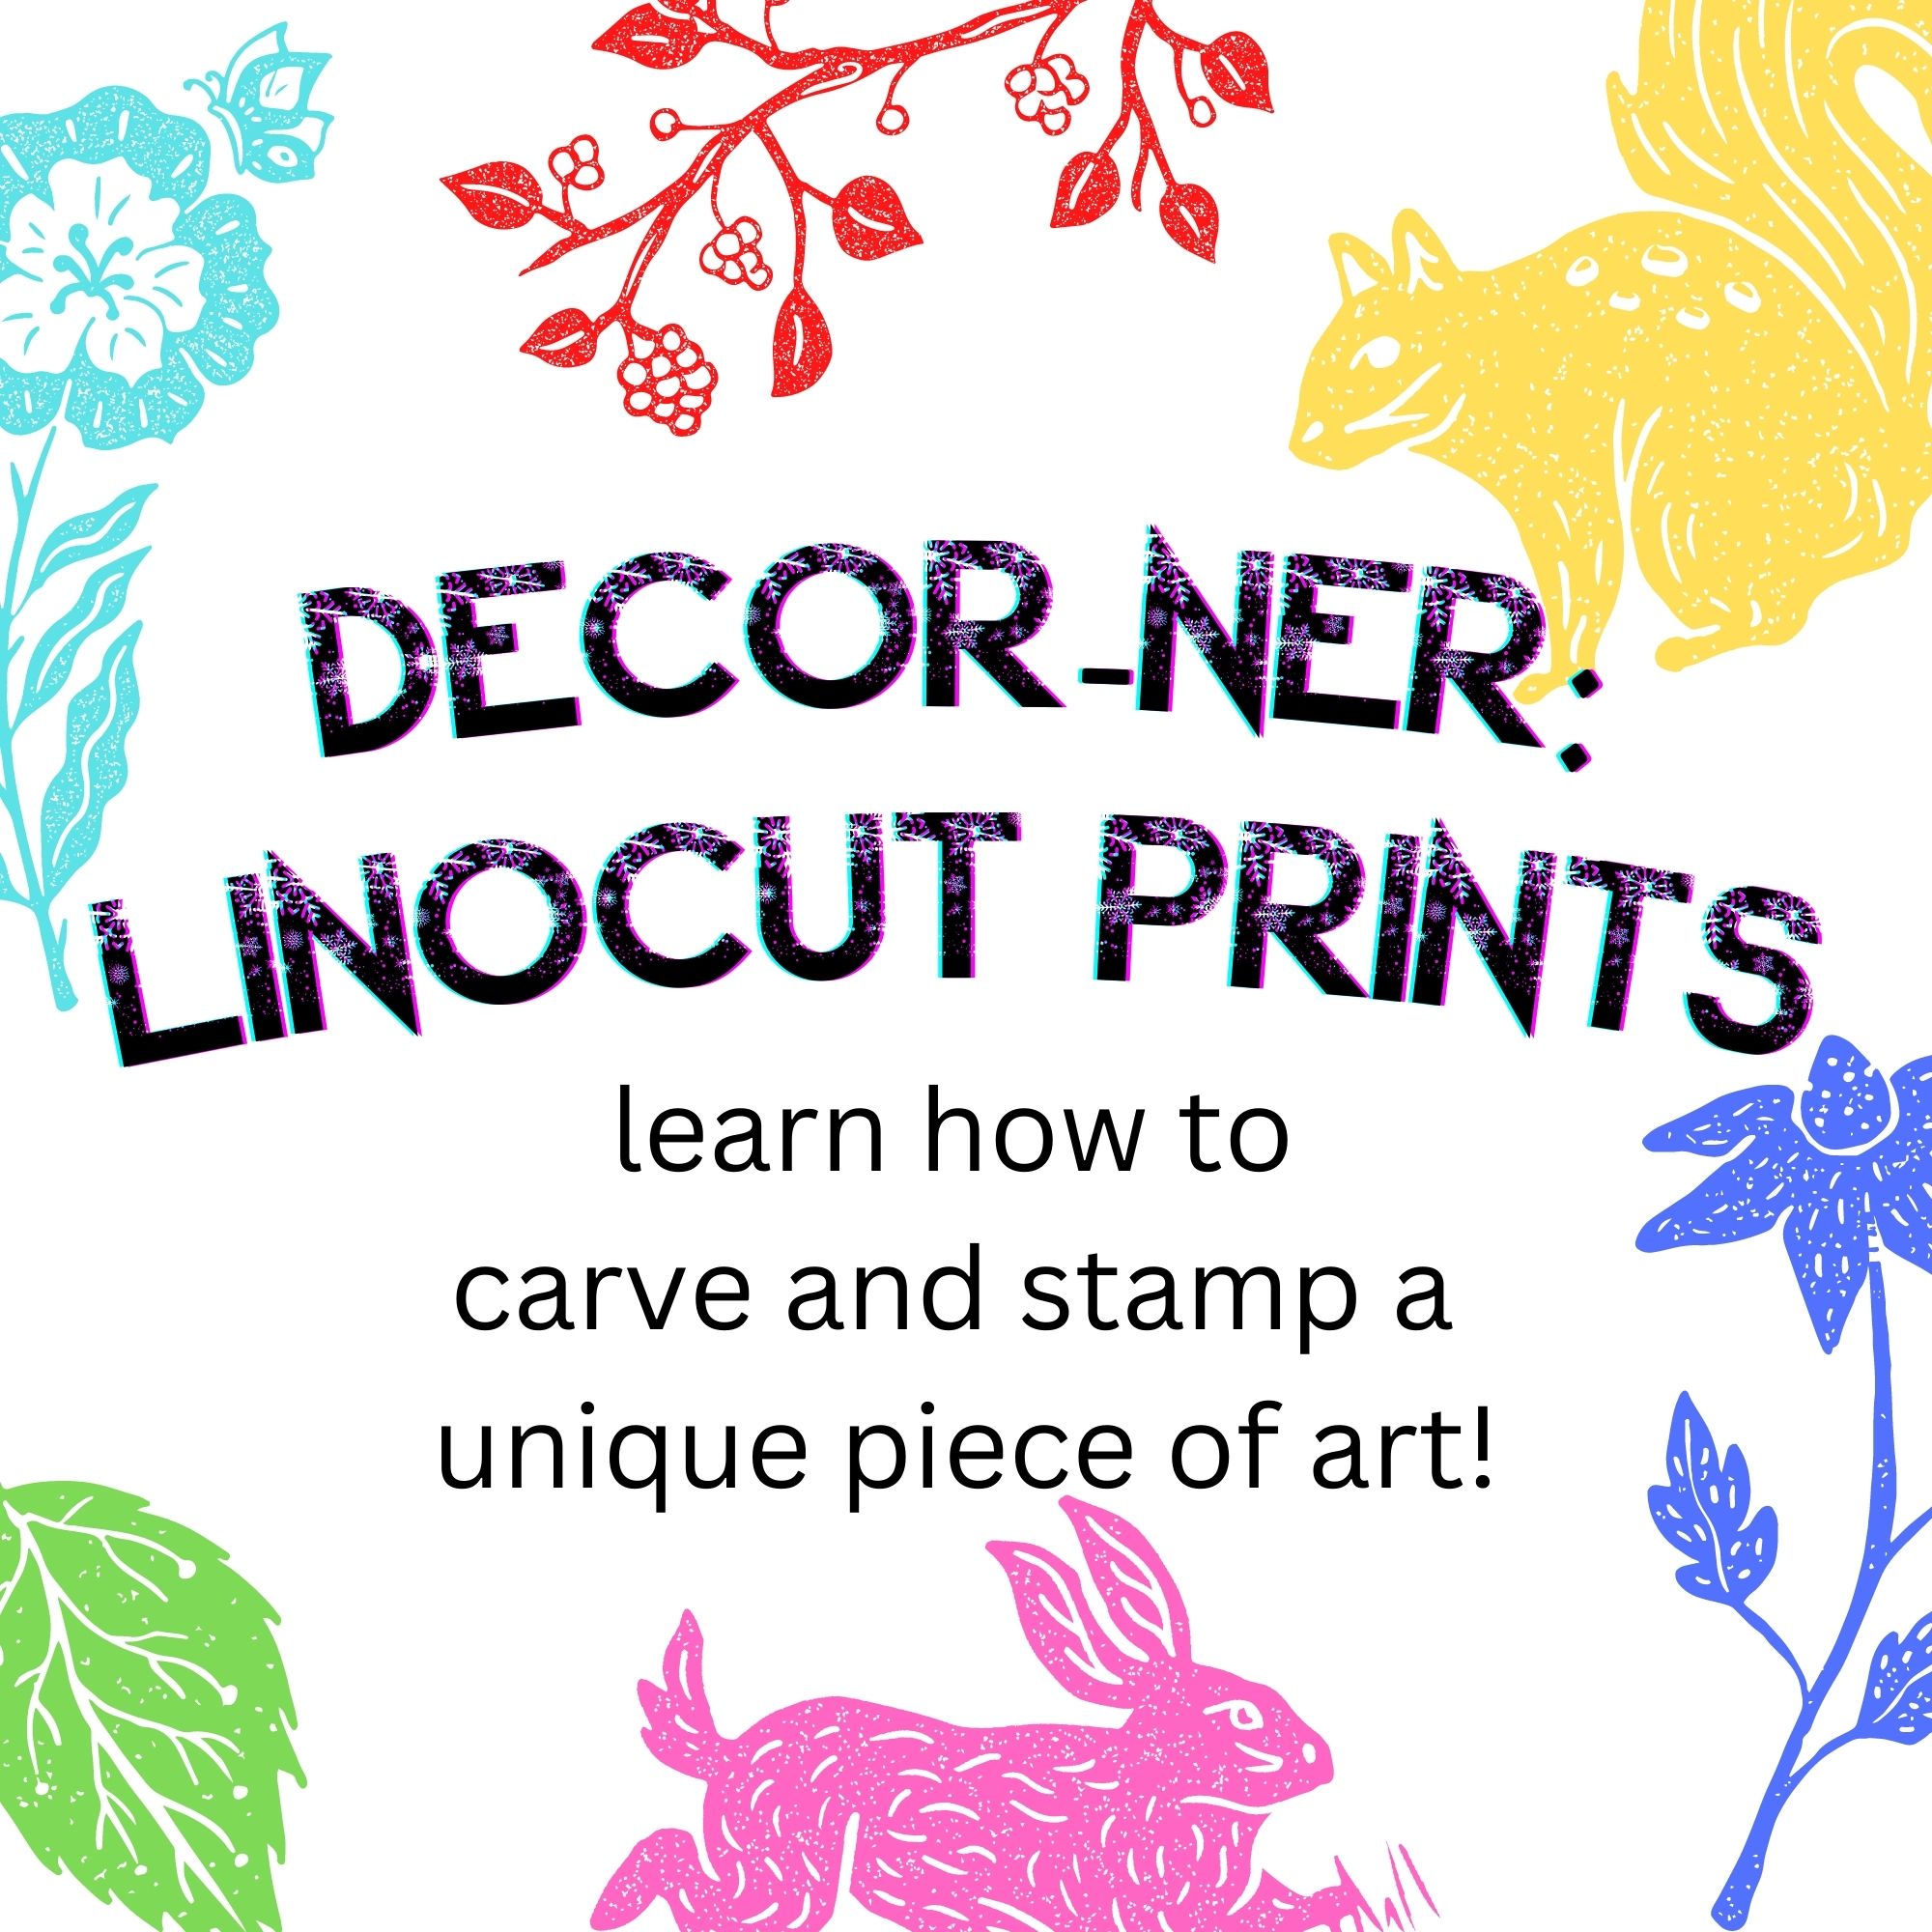 Text Reading "Decor-ner: Linocut Prints" surrounded by multicolored natural icons in a textured pattern